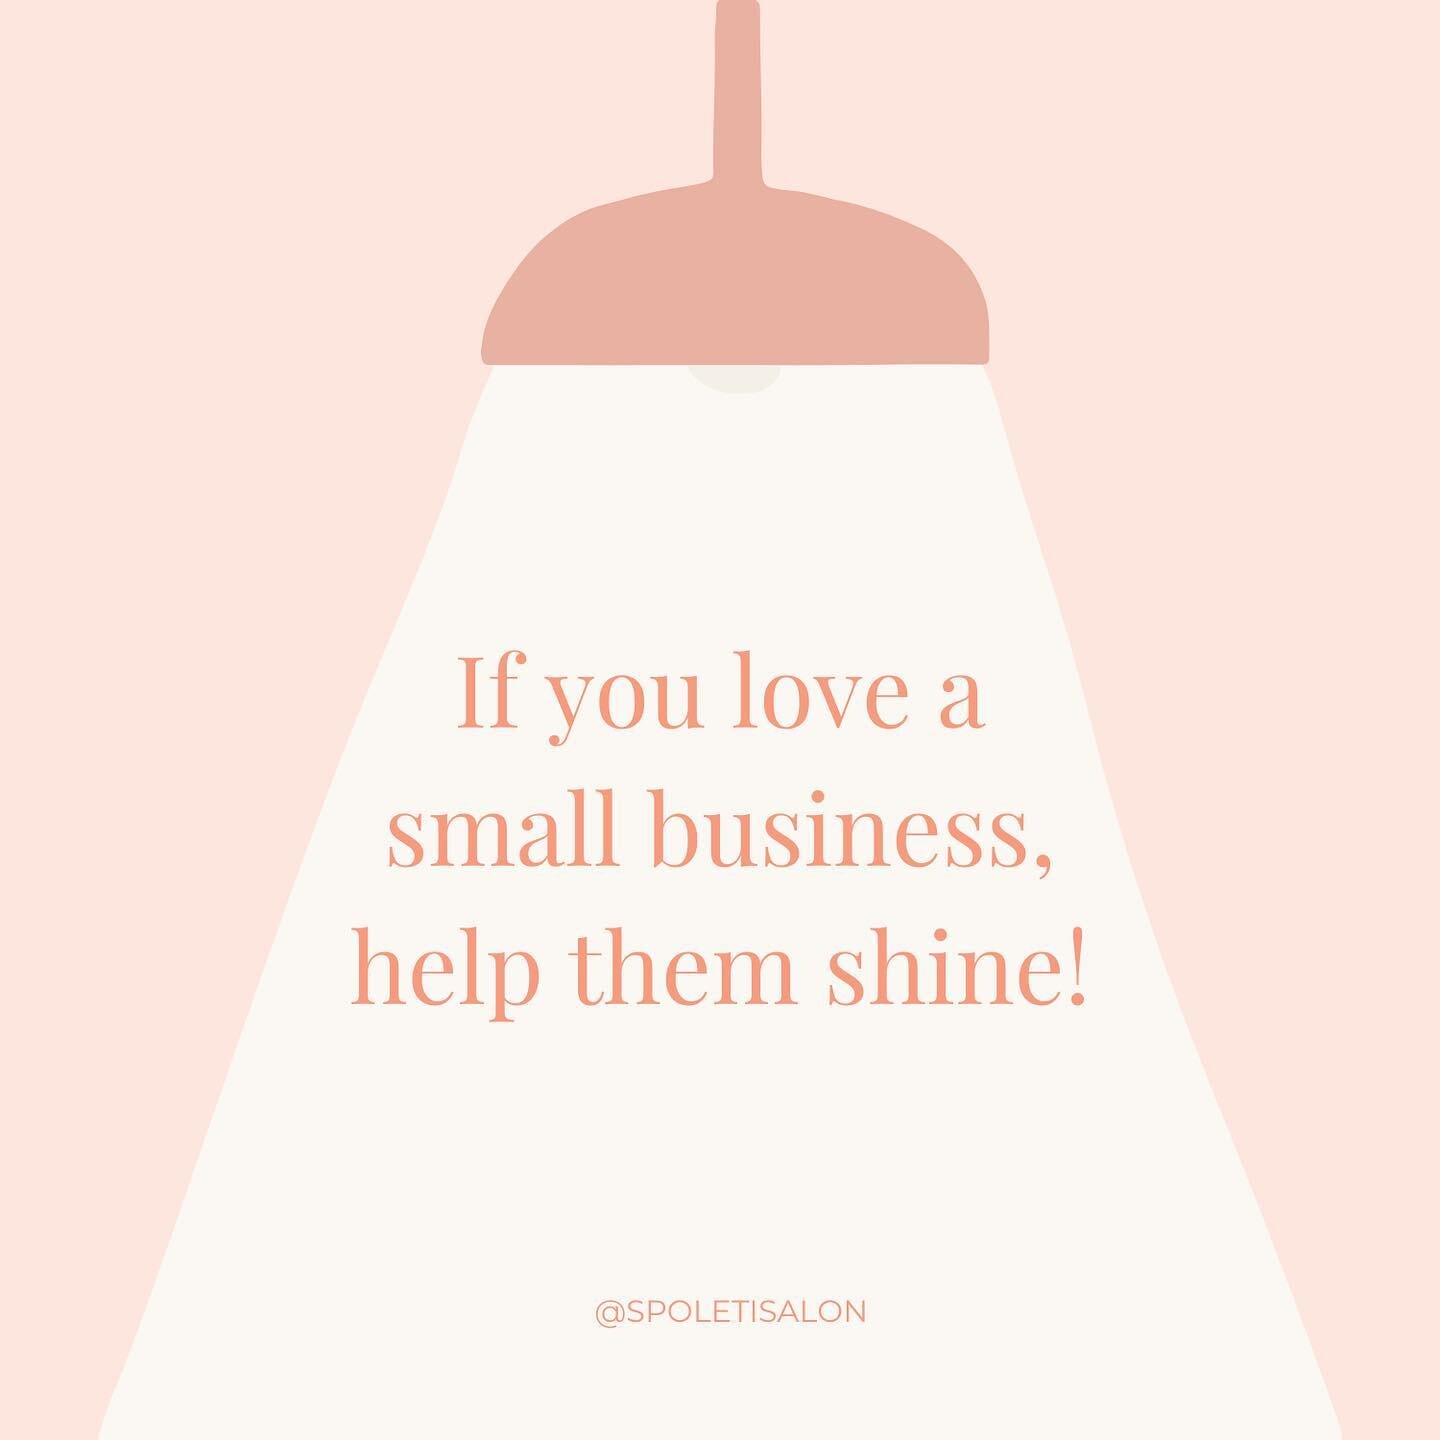 On Saturdays, we support small 💁&zwj;♀️ Your support is what helps small businesses shine! If you love a small biz, drop some encouragement for them in the comments ✨